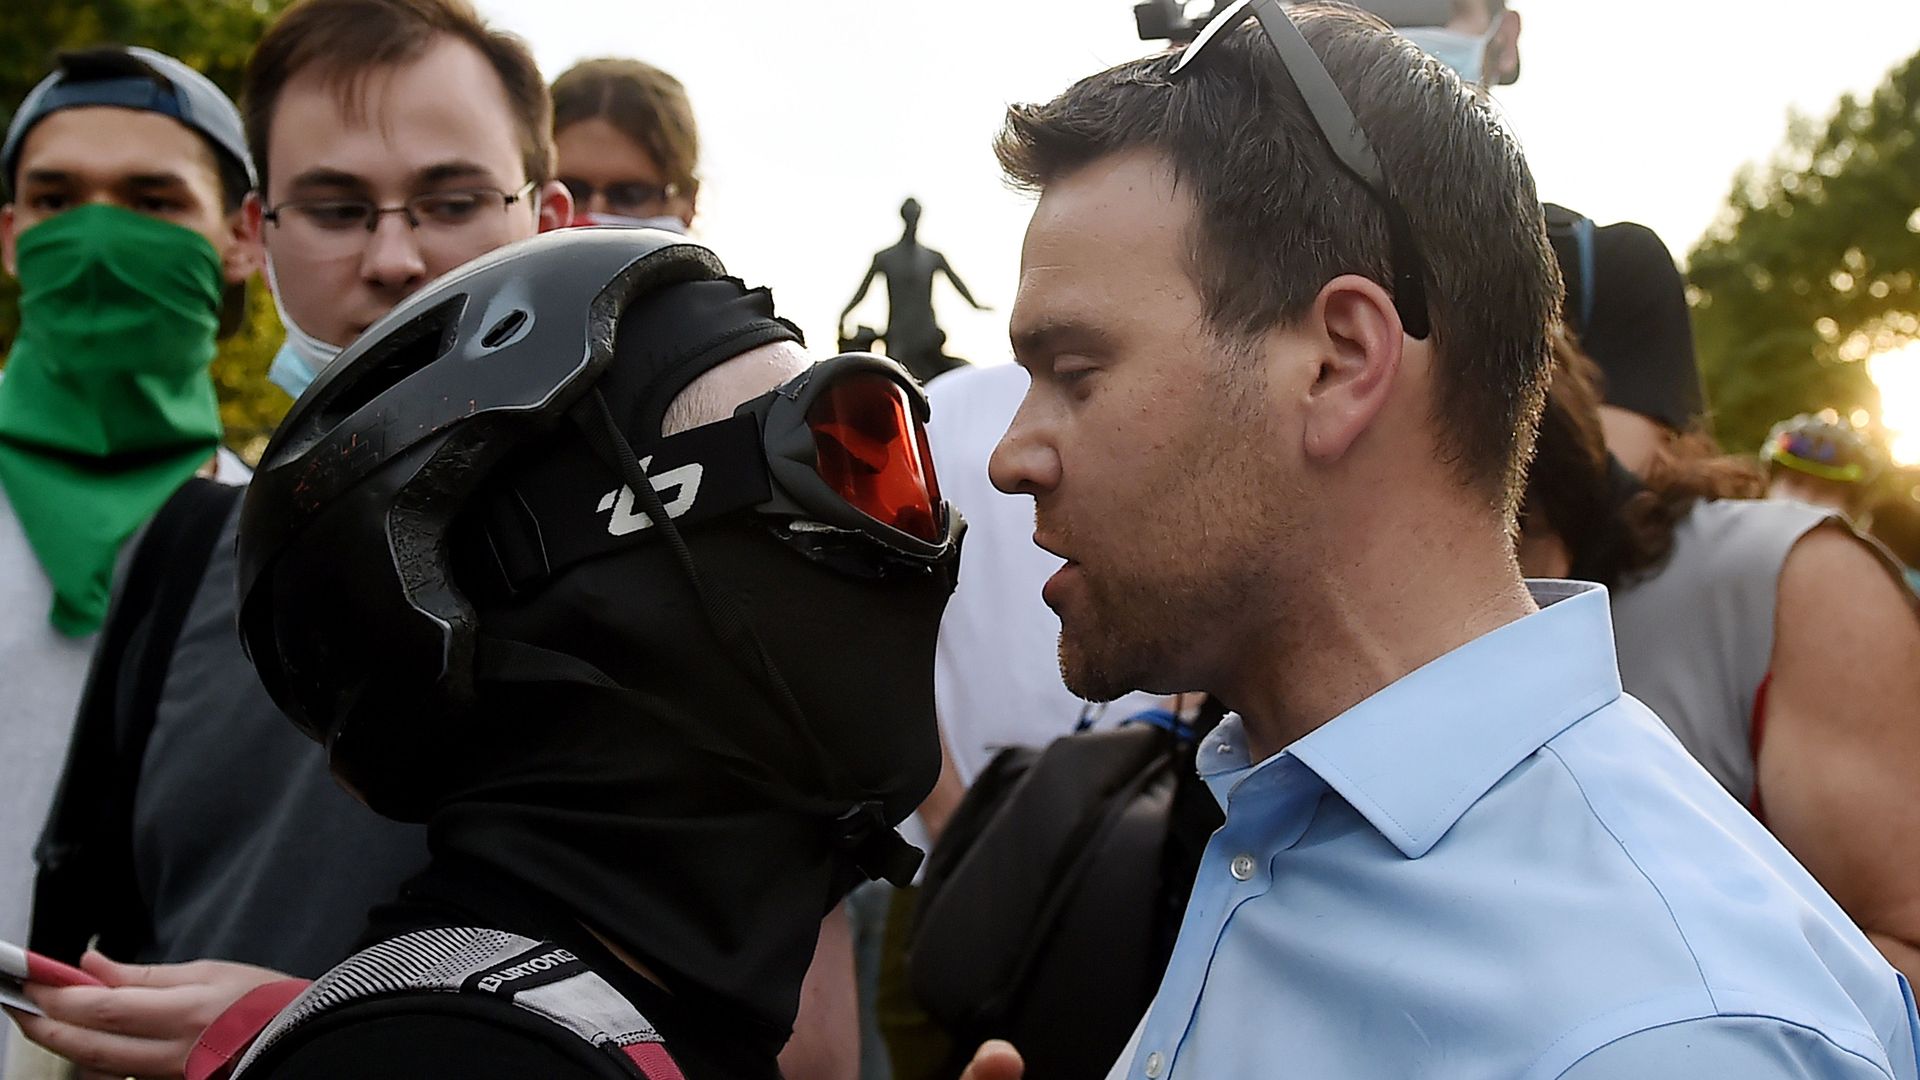 Conservative activist Jack Posobiec is seen arguing with an anti-racism protestor.